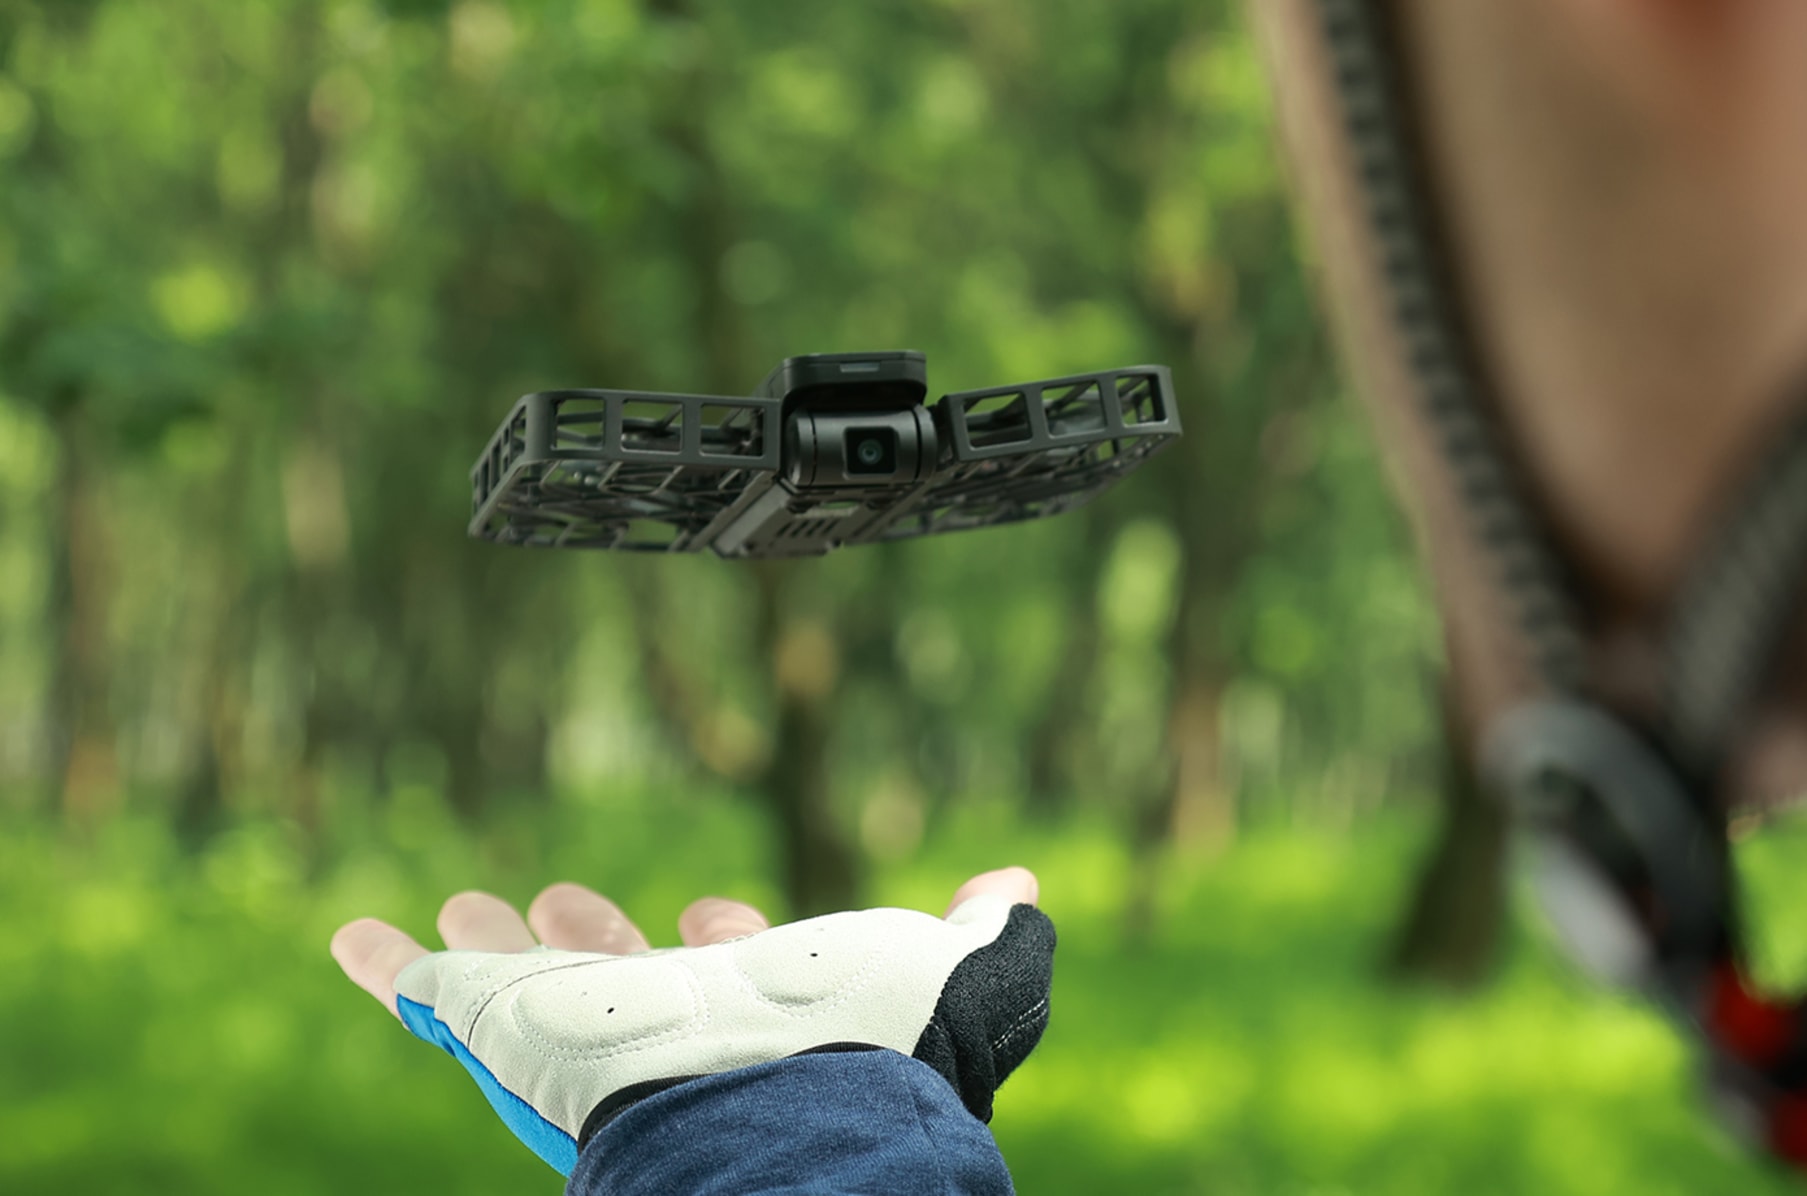 HoverAir X1 is a Pocket-Sized Drone Perfect for Beginners